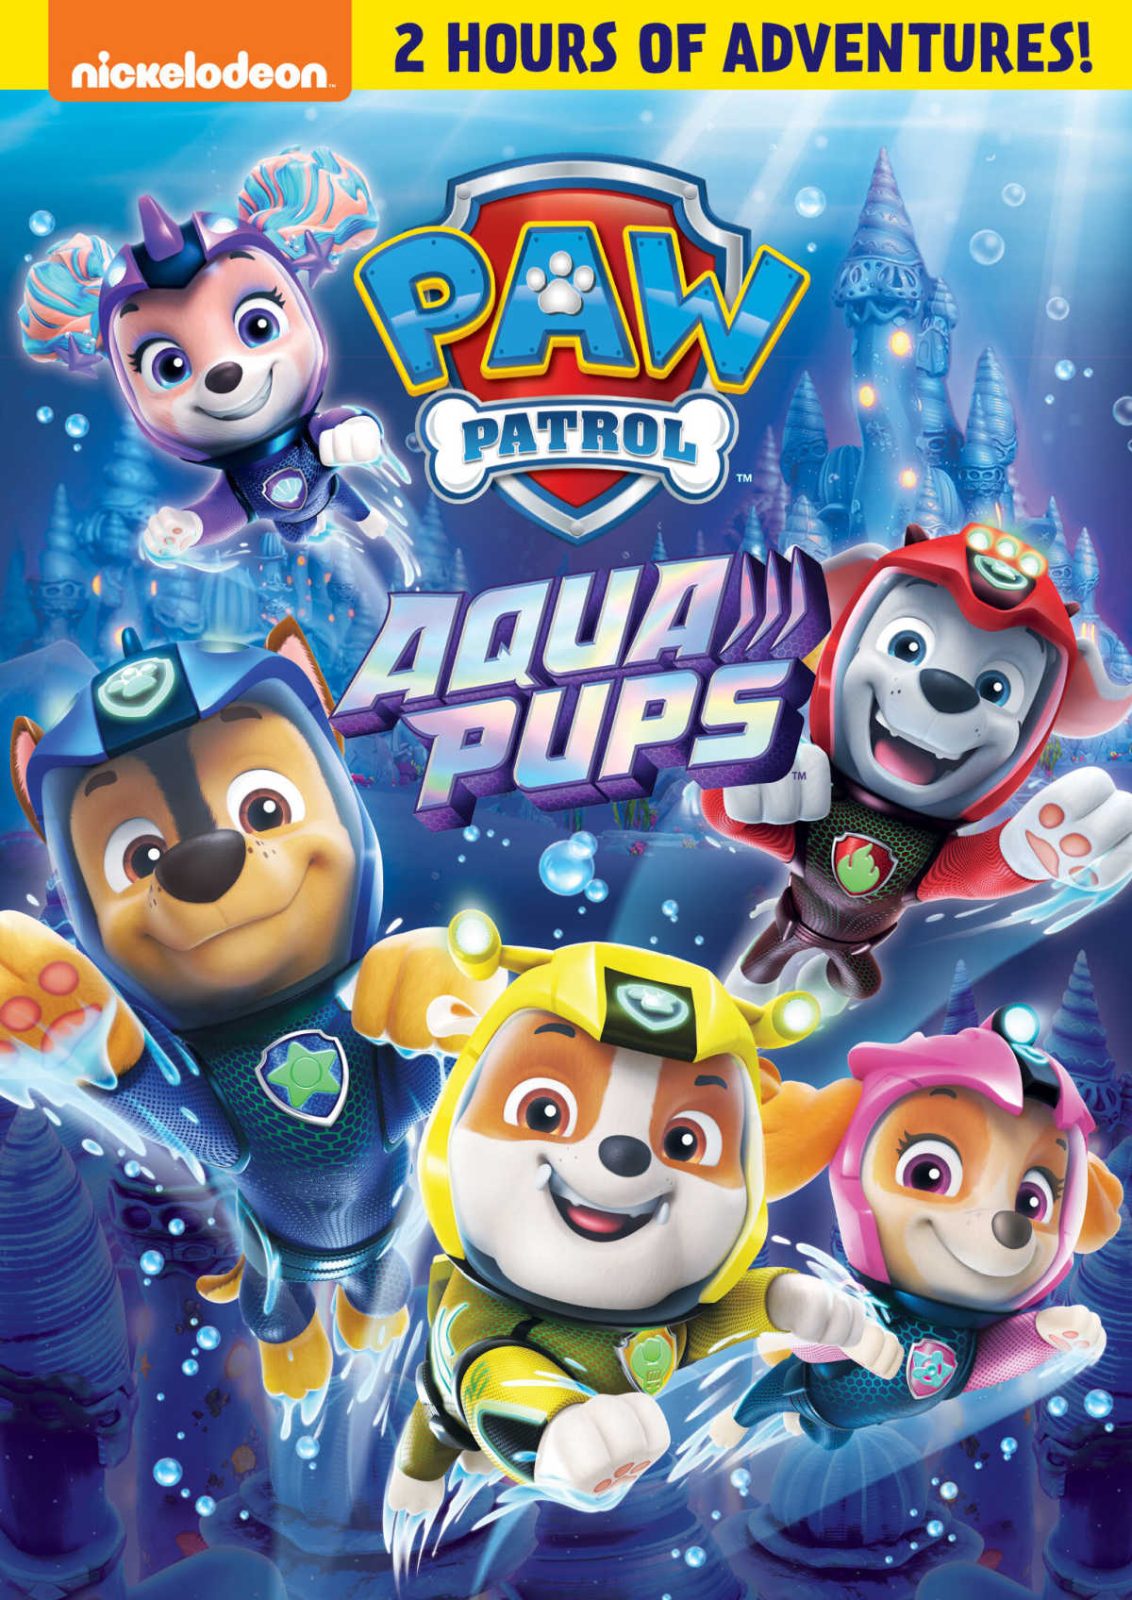 Kids will enjoy the fun and excitement of underwater adventures, when they watch the new PAW Patrol Aqua Pups DVD.